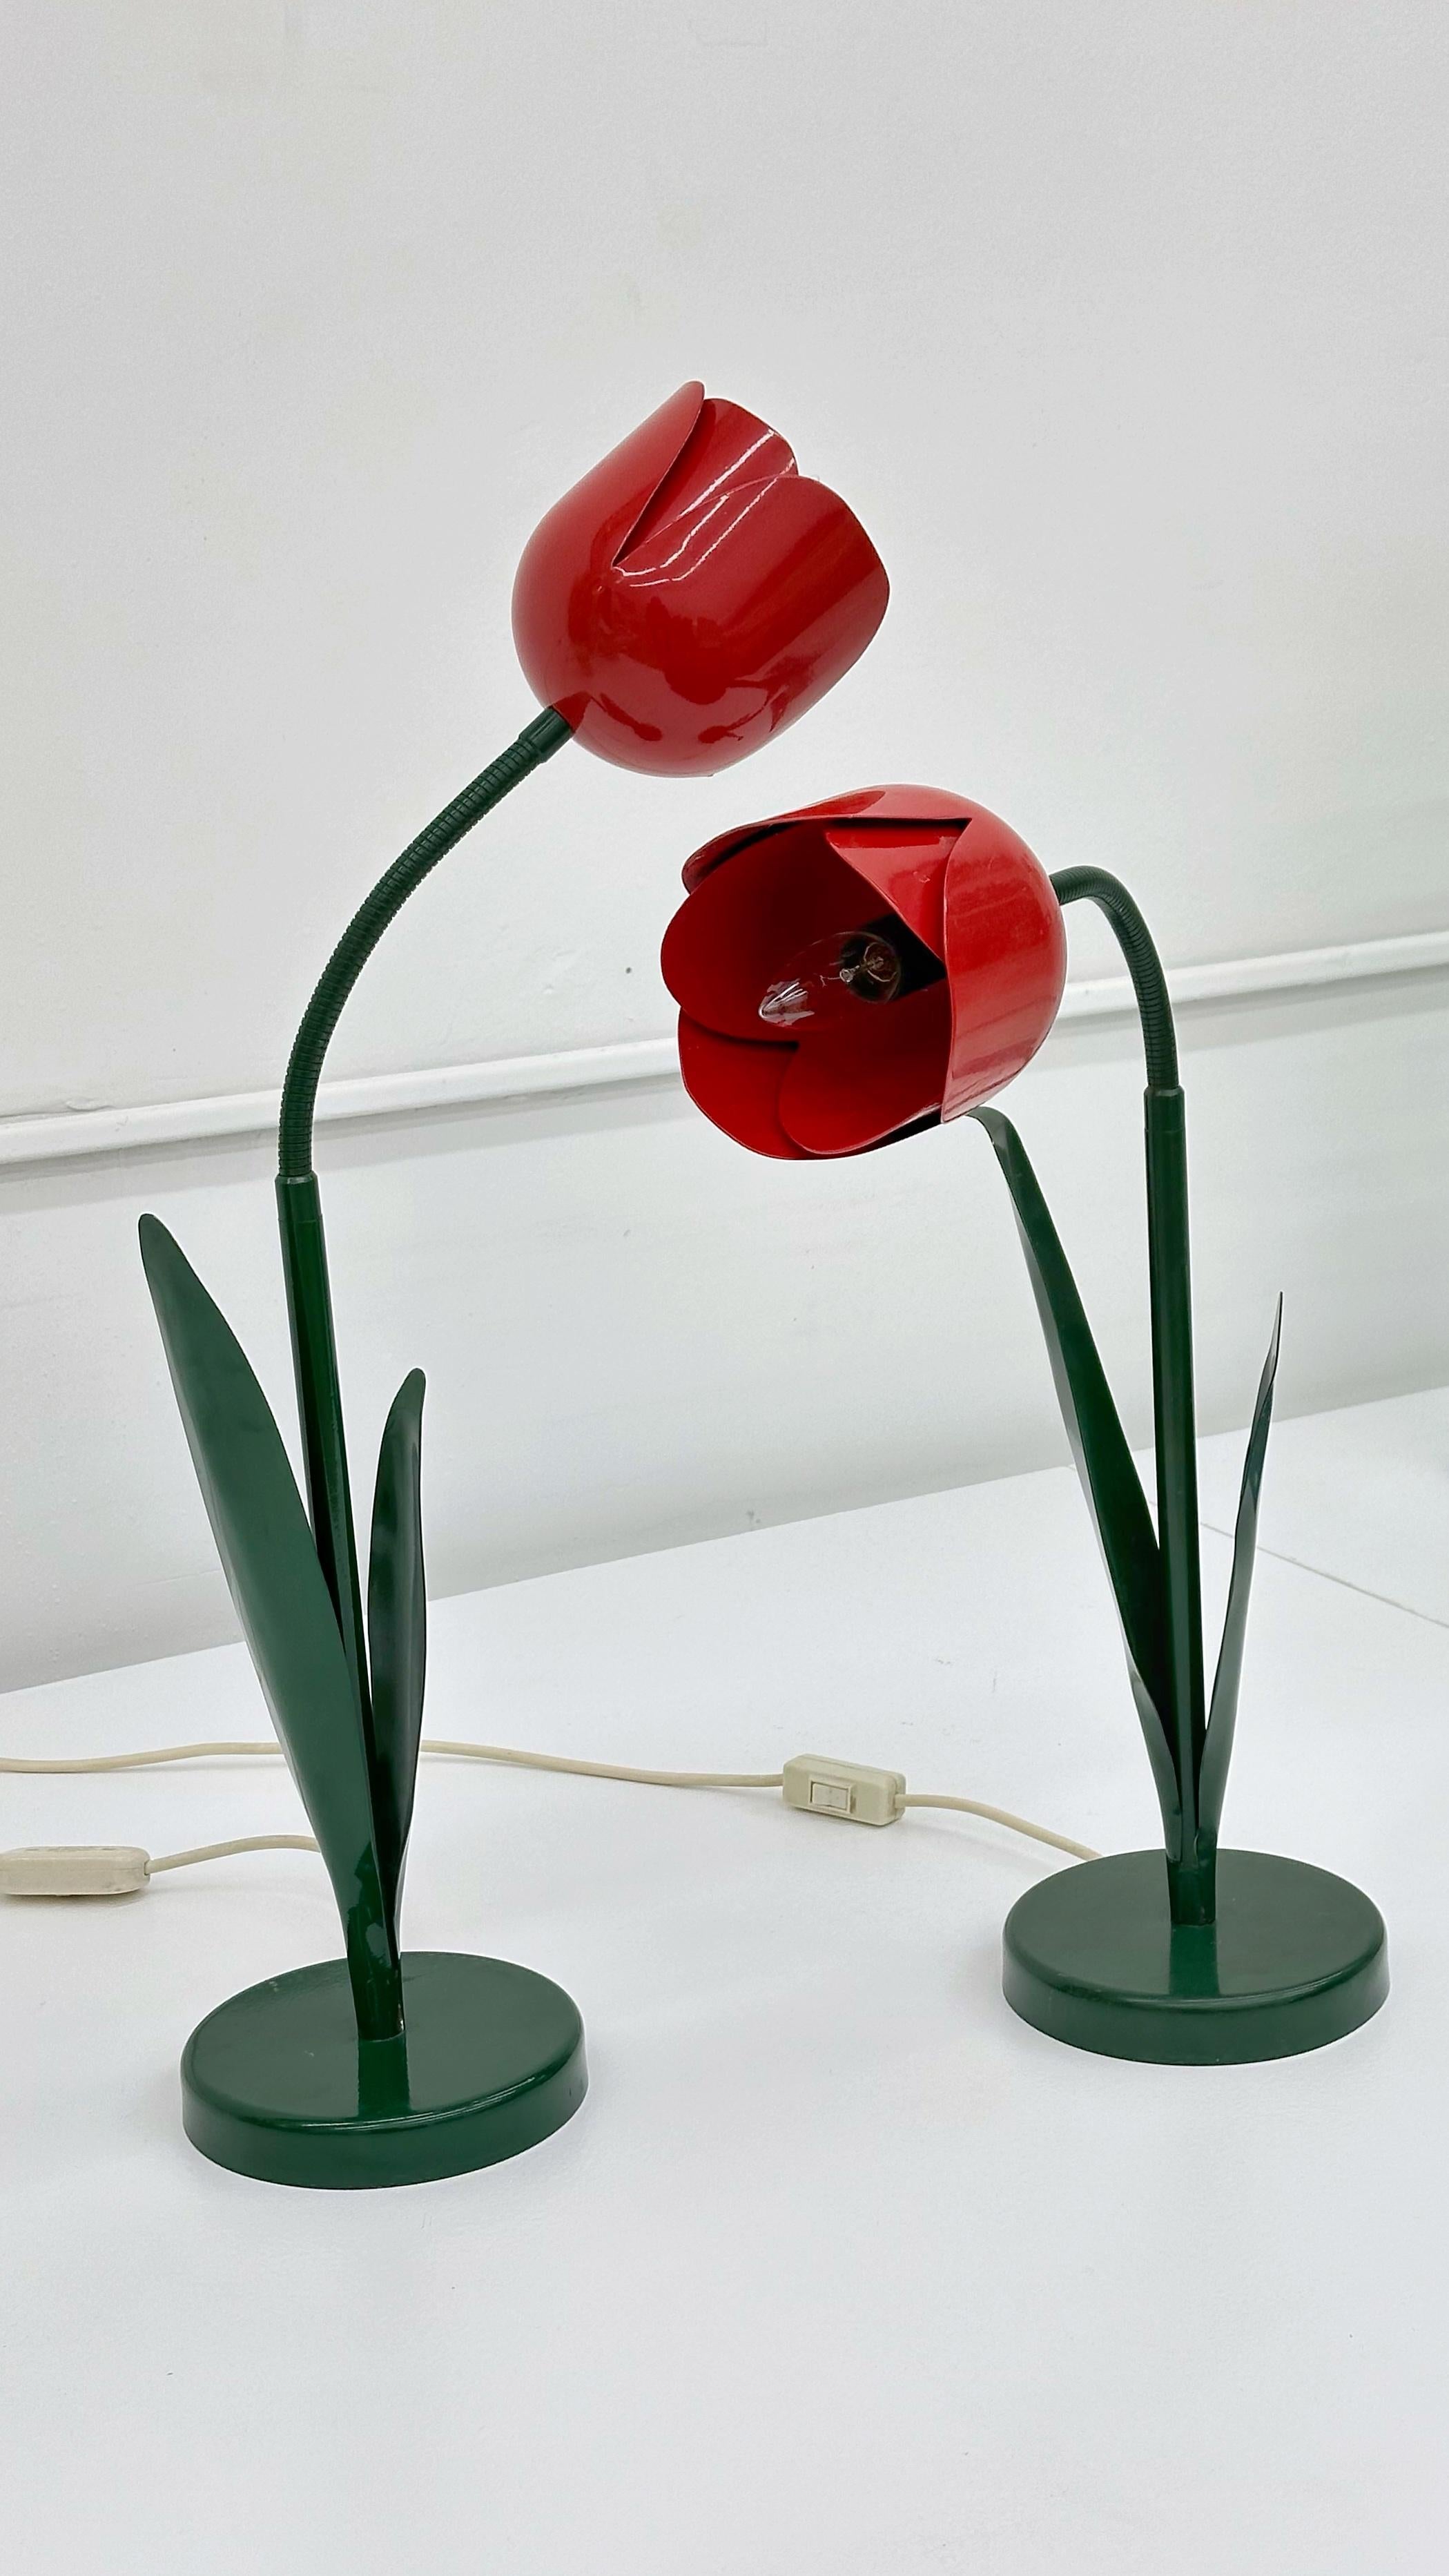 UK, 1984-85. Imported to Chicago in 1989 by Peter Chiswick. Whimsical red tulip crafted of a steel base with aluminum shade and adjustable gooseneck.